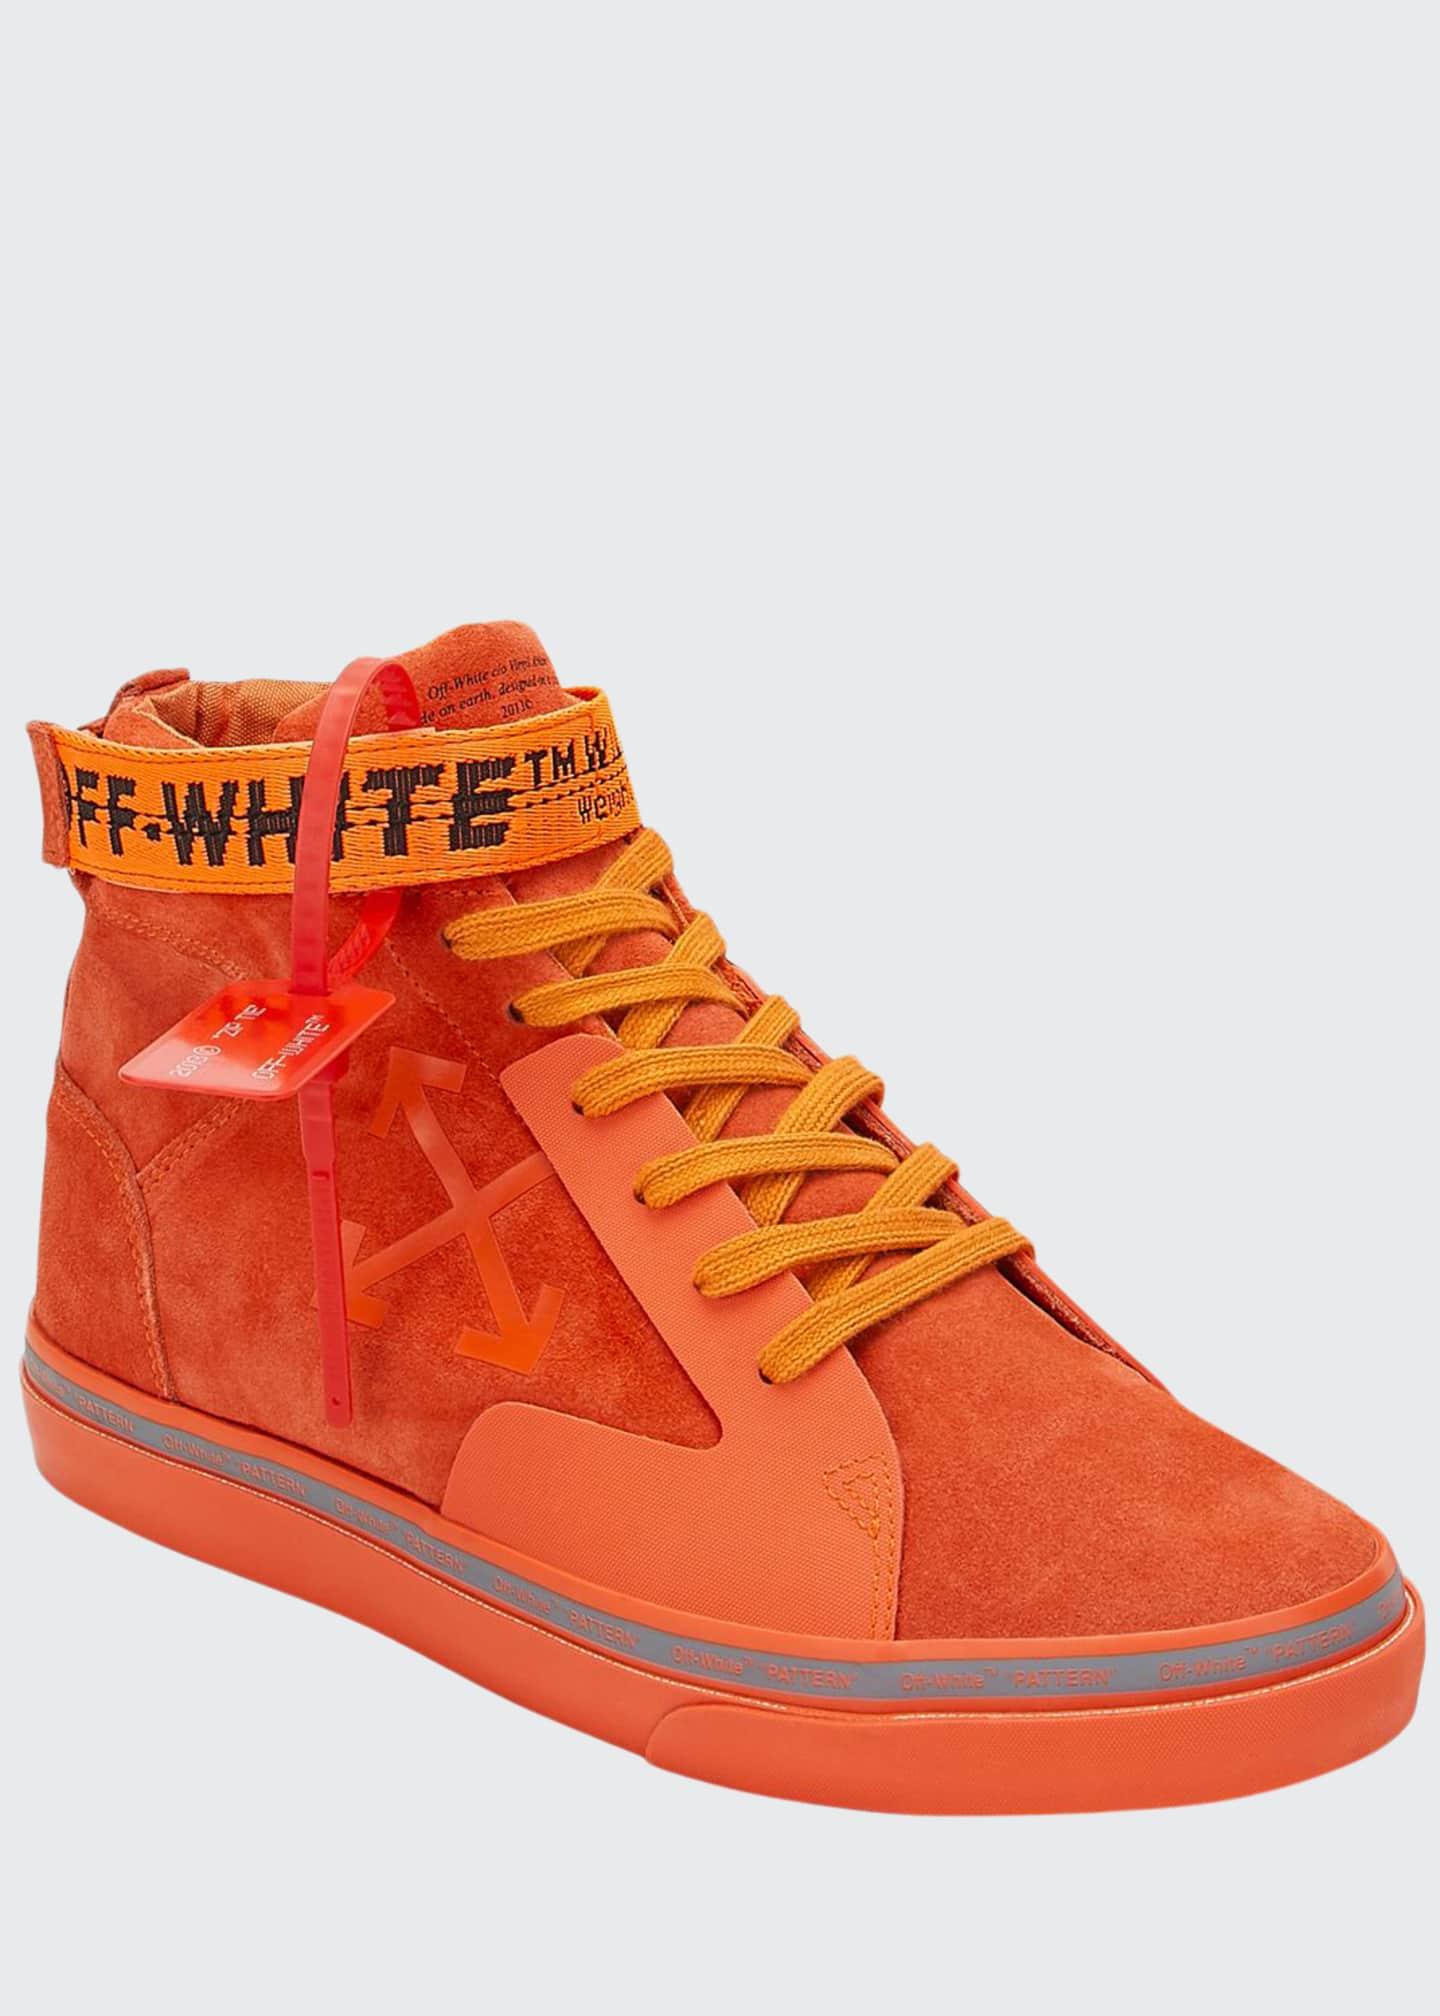 Off-White c/o Virgil Abloh Leather Industrial Skate Sneakers in Orange for  Men - Save 51% - Lyst